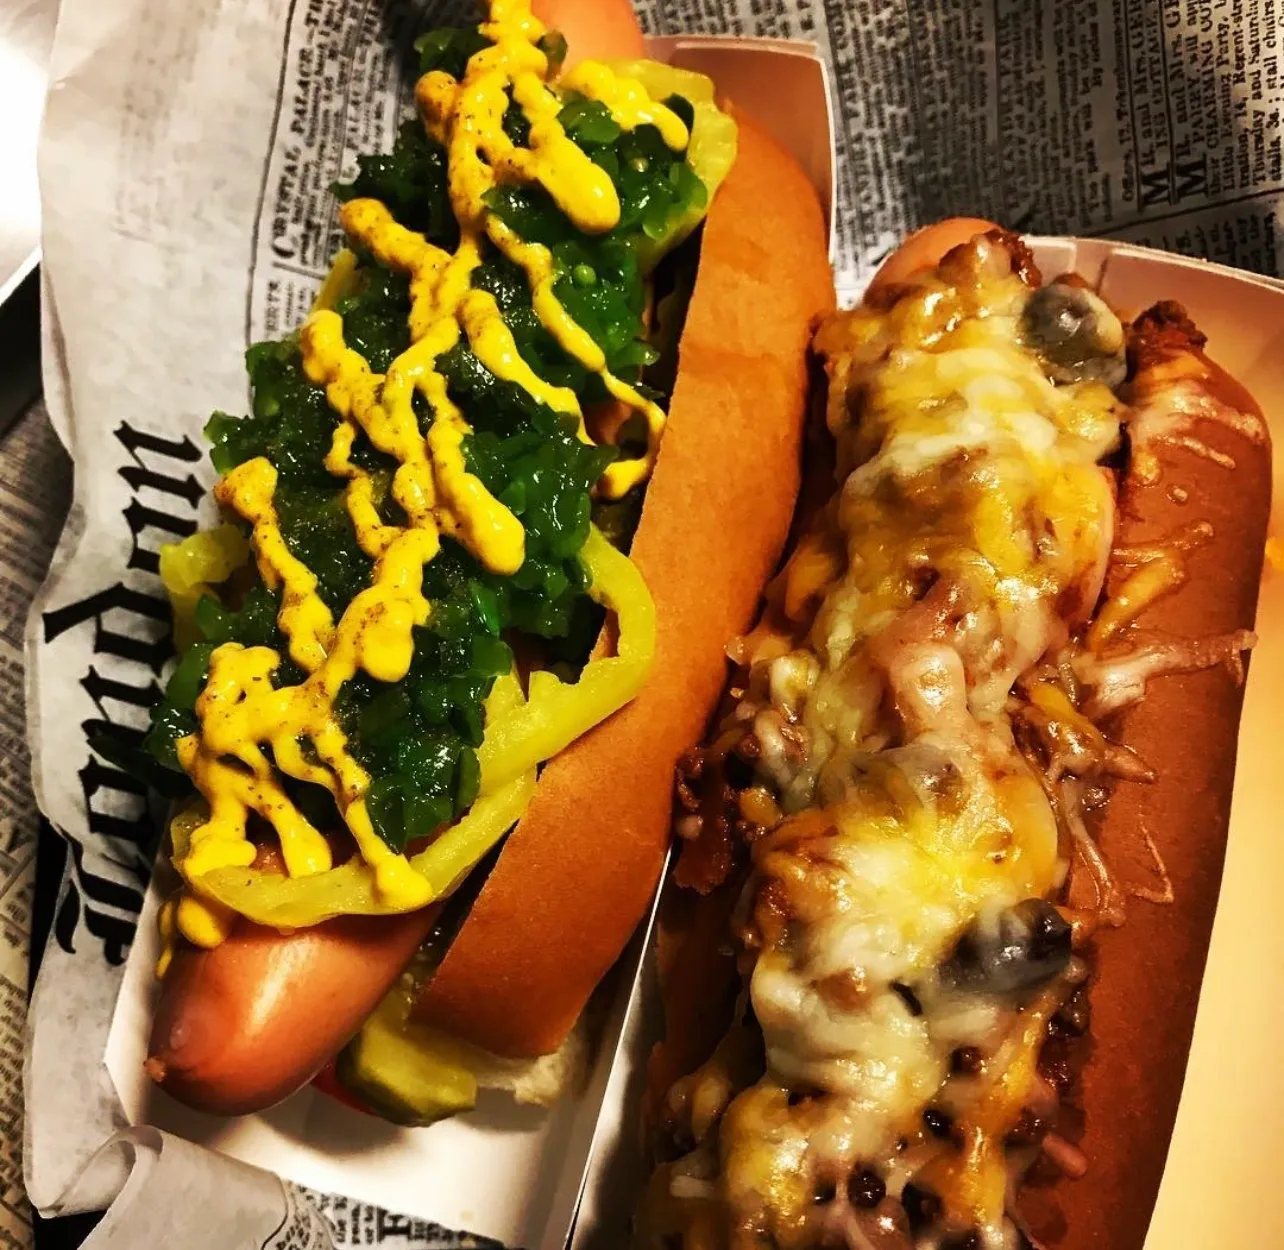 Hot Dog with cheese and green sauce